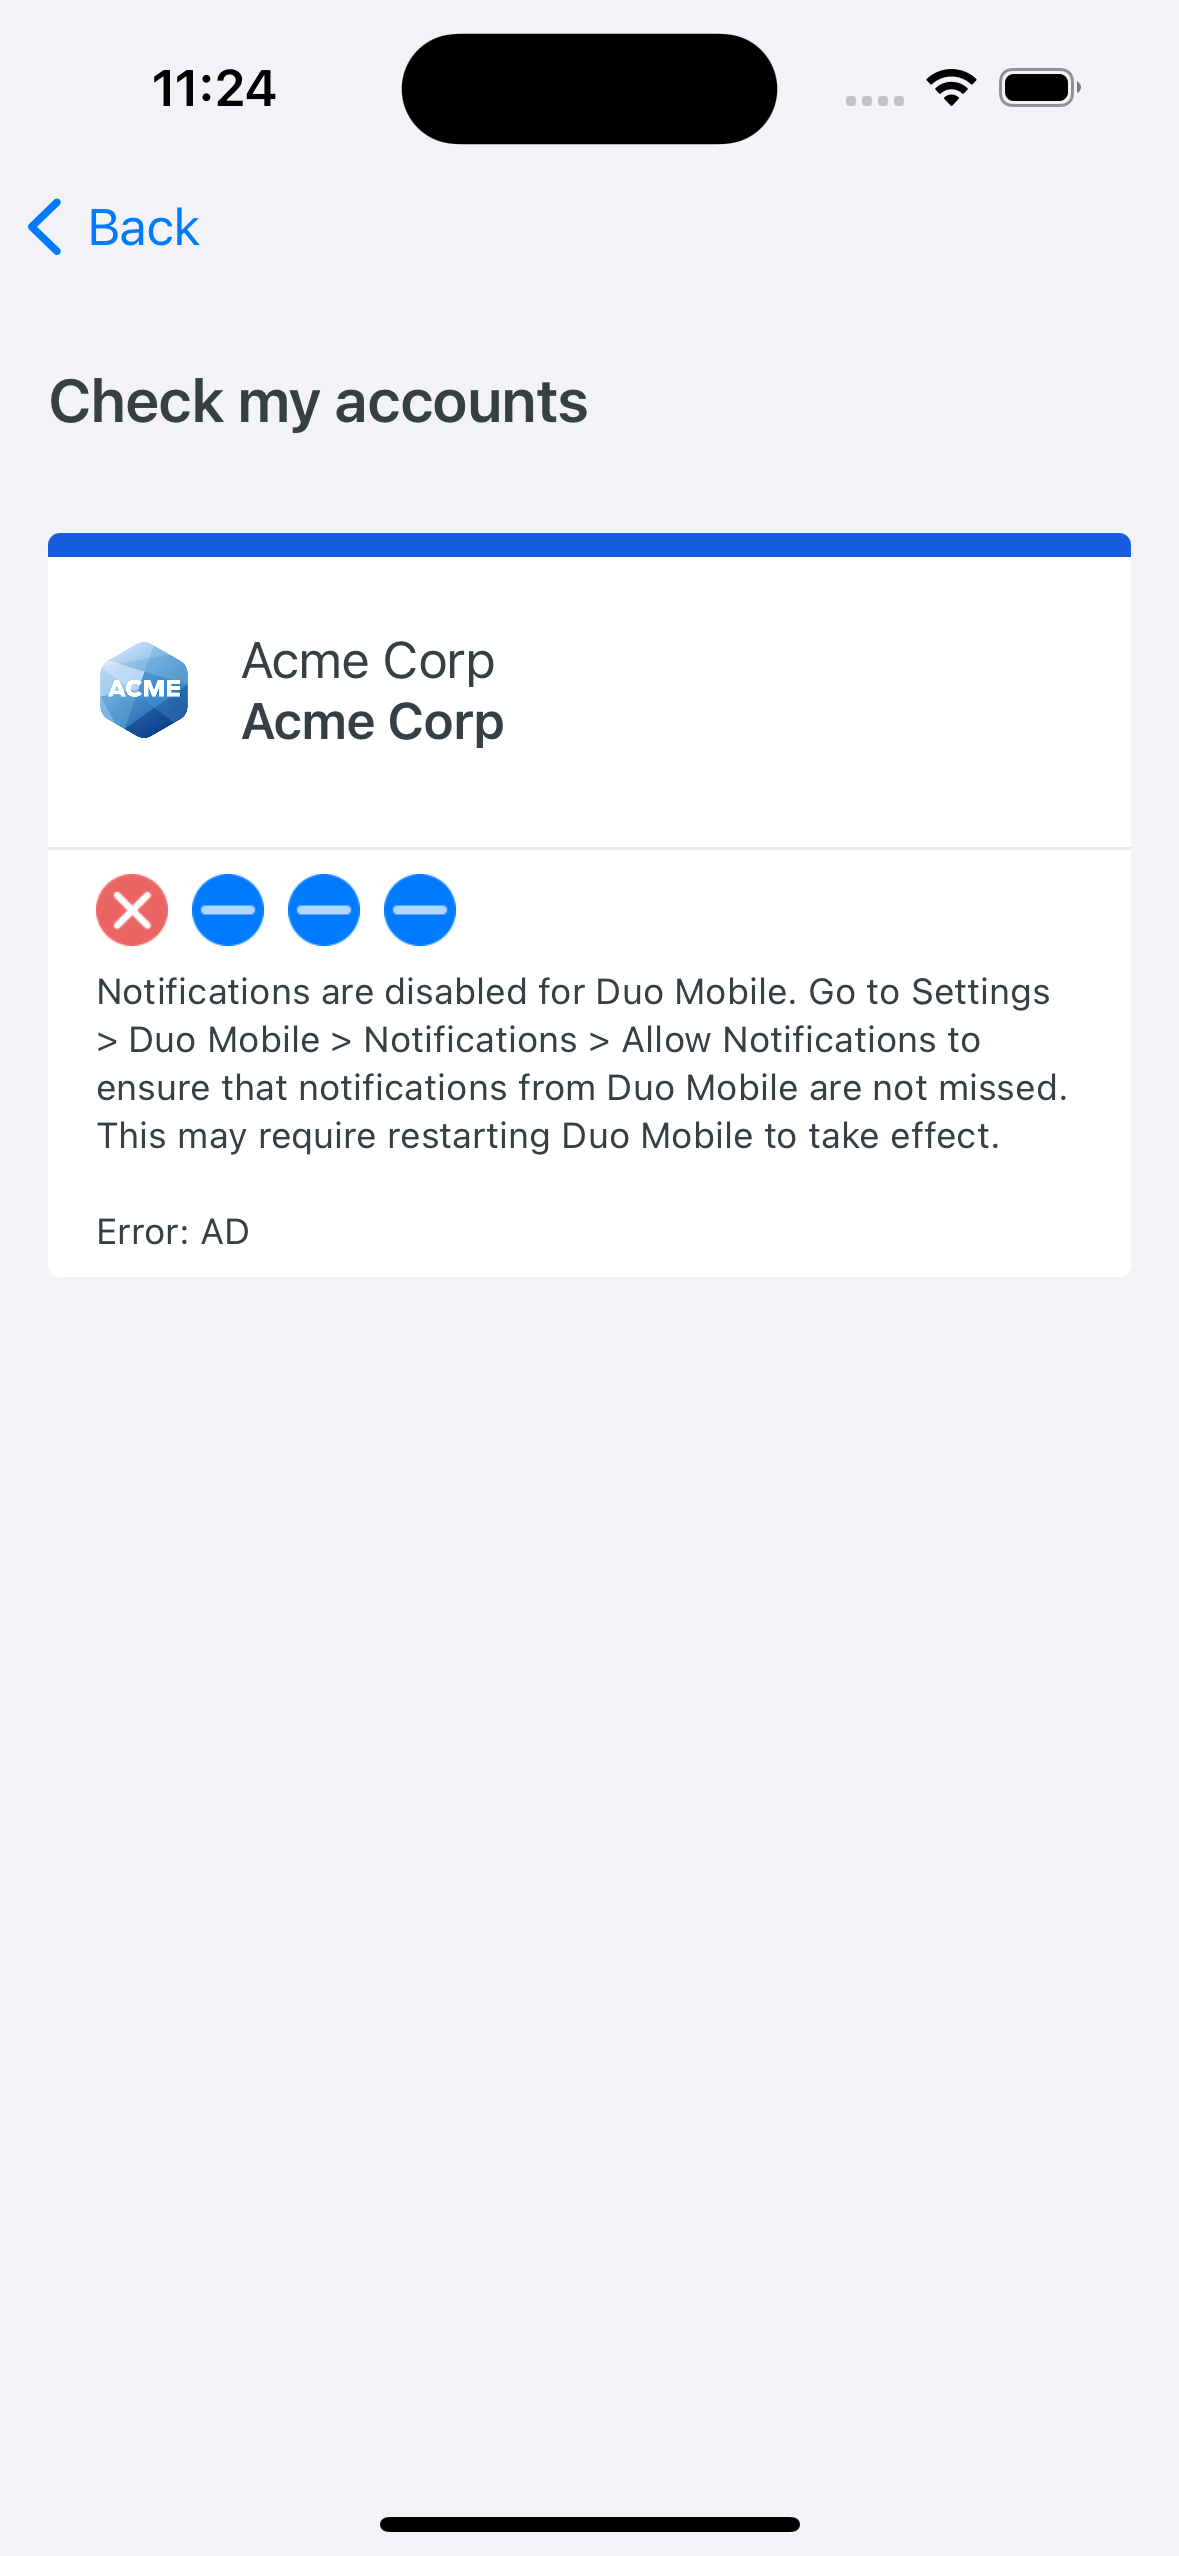 Troubleshoot an account on Duo Mobile iOS